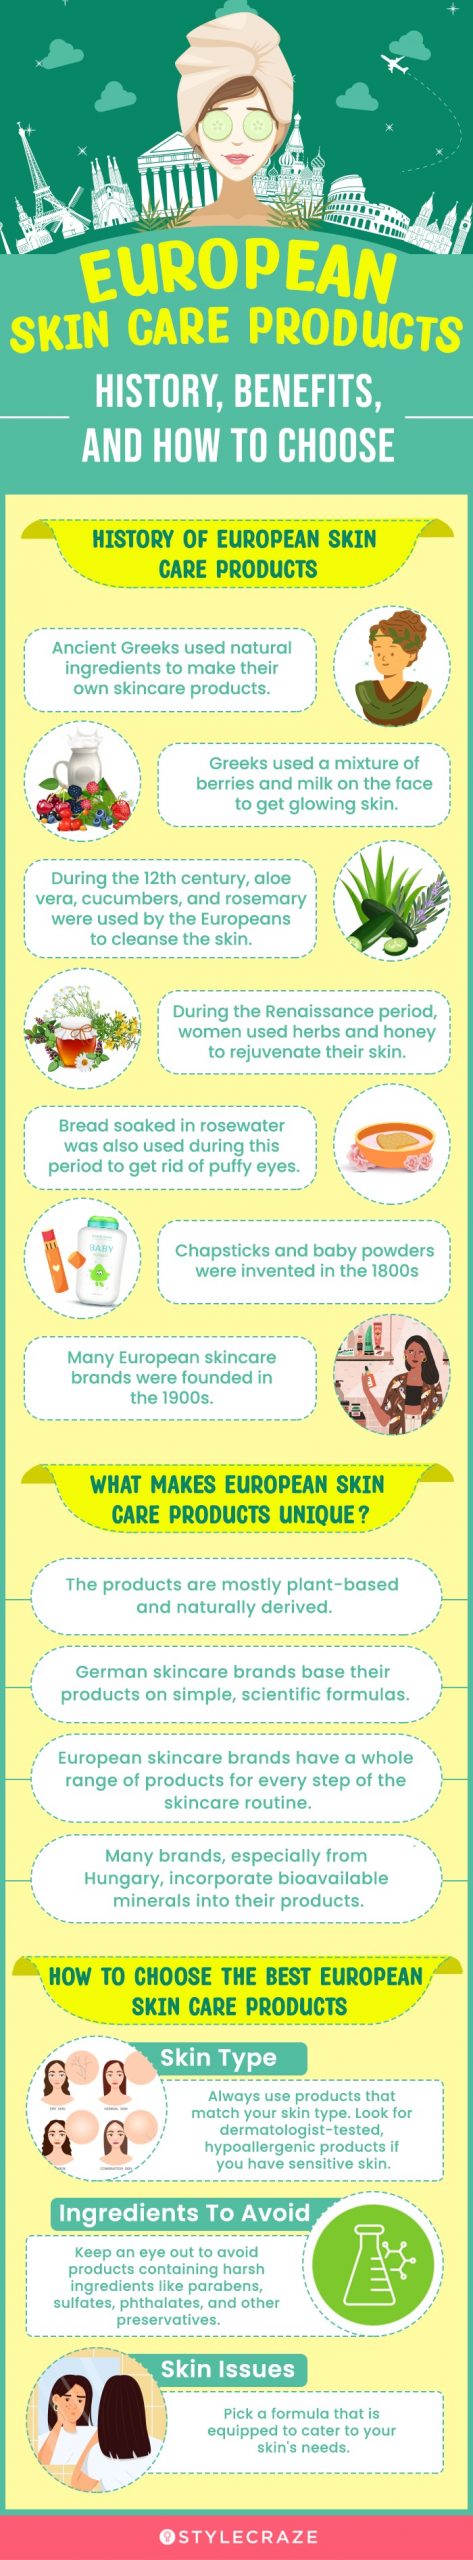 European Skincare Products: History, Benefits [infographic]